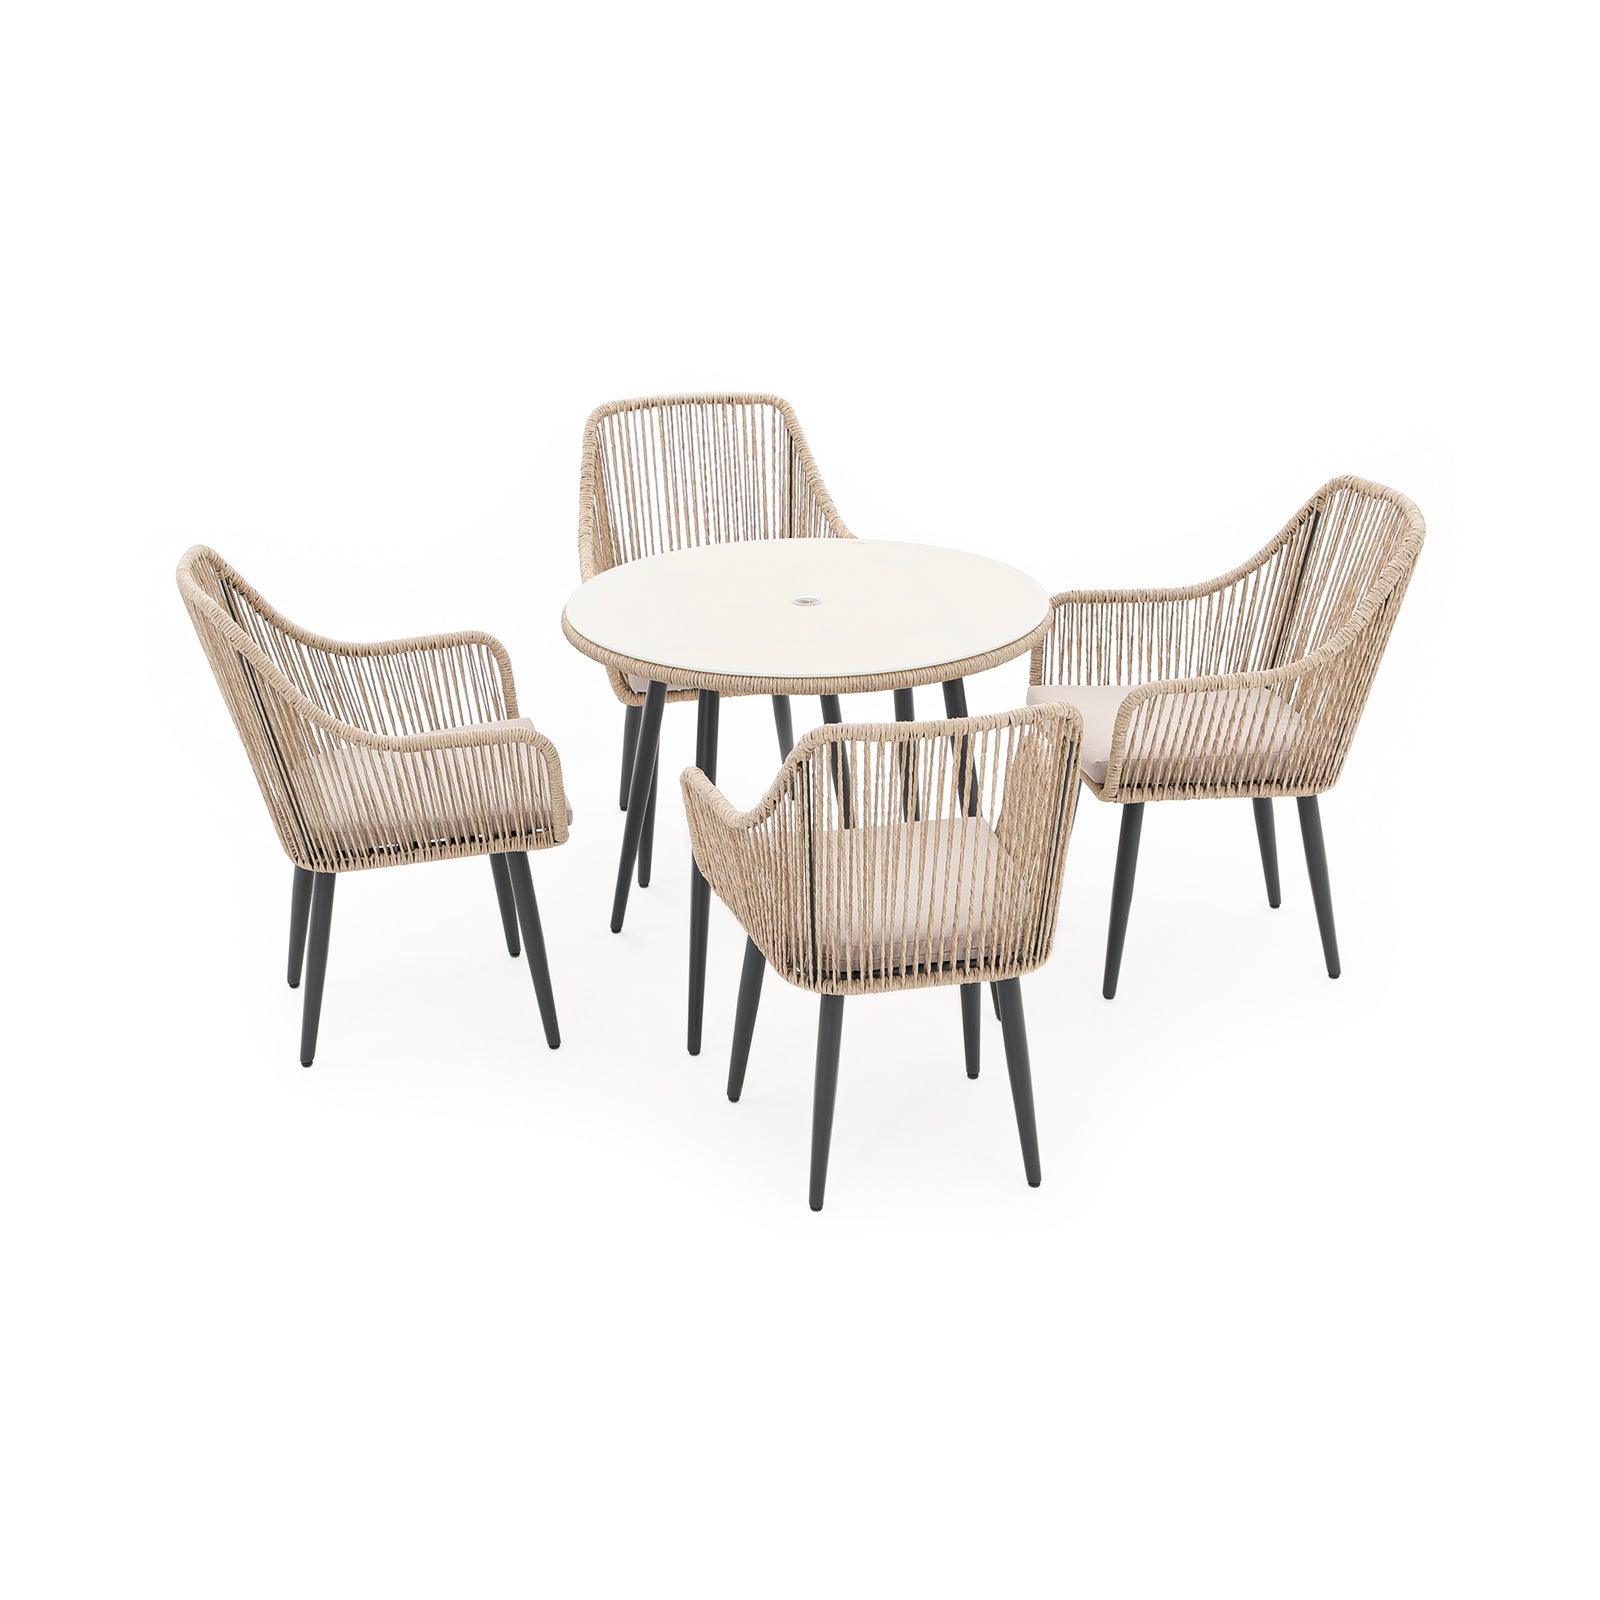 Hallerbos natural 5-piece outdoor Dining Set with steel frame, beige cushion, 1 Round Dining Table, 4 dining chairs - Jardina Furniture - 1#Color_Natural